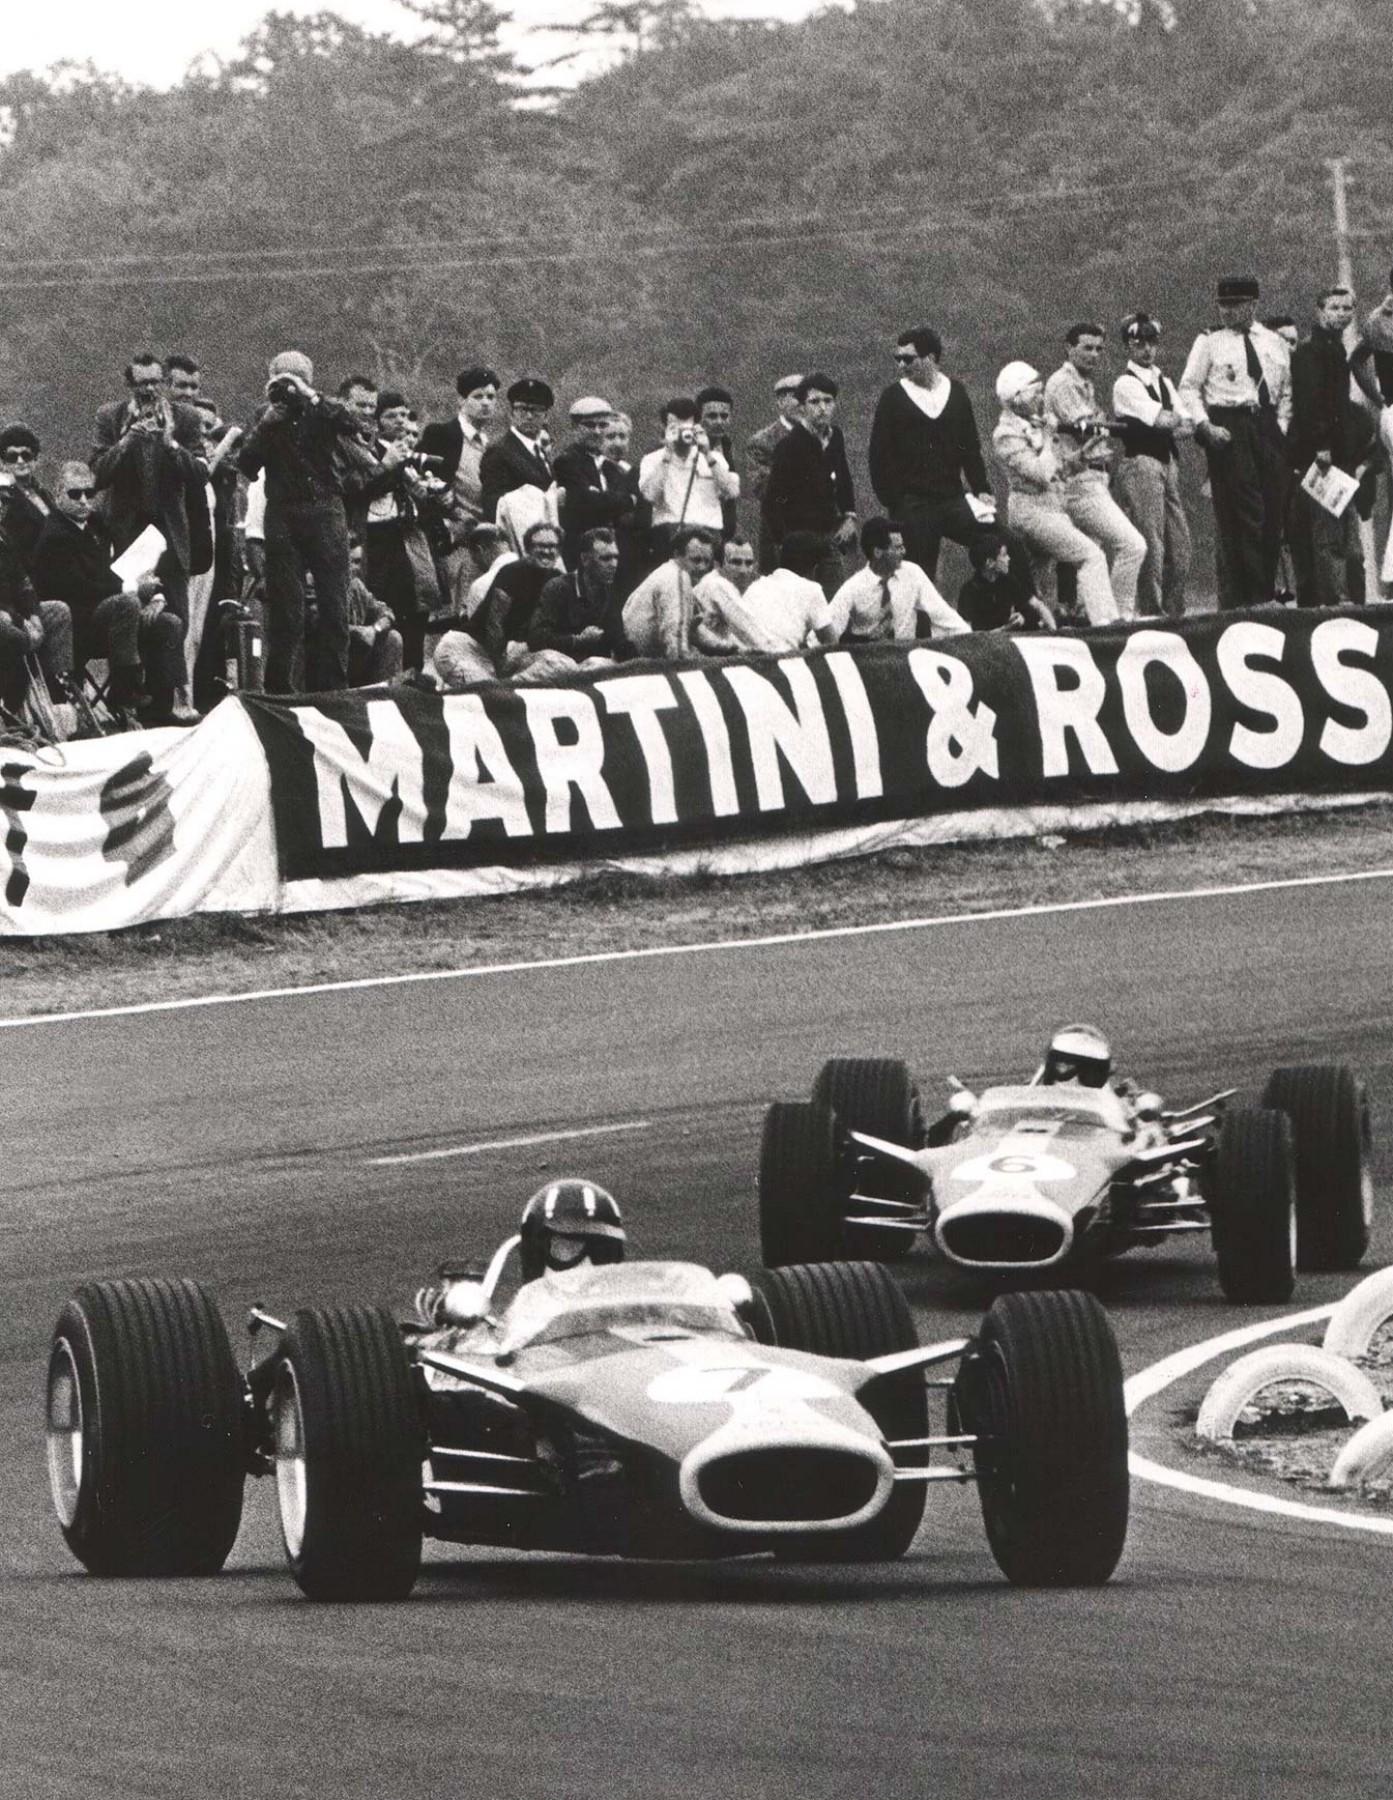 Jim Clark and Graham Hill dueling in their Lotus 49s during the 1967